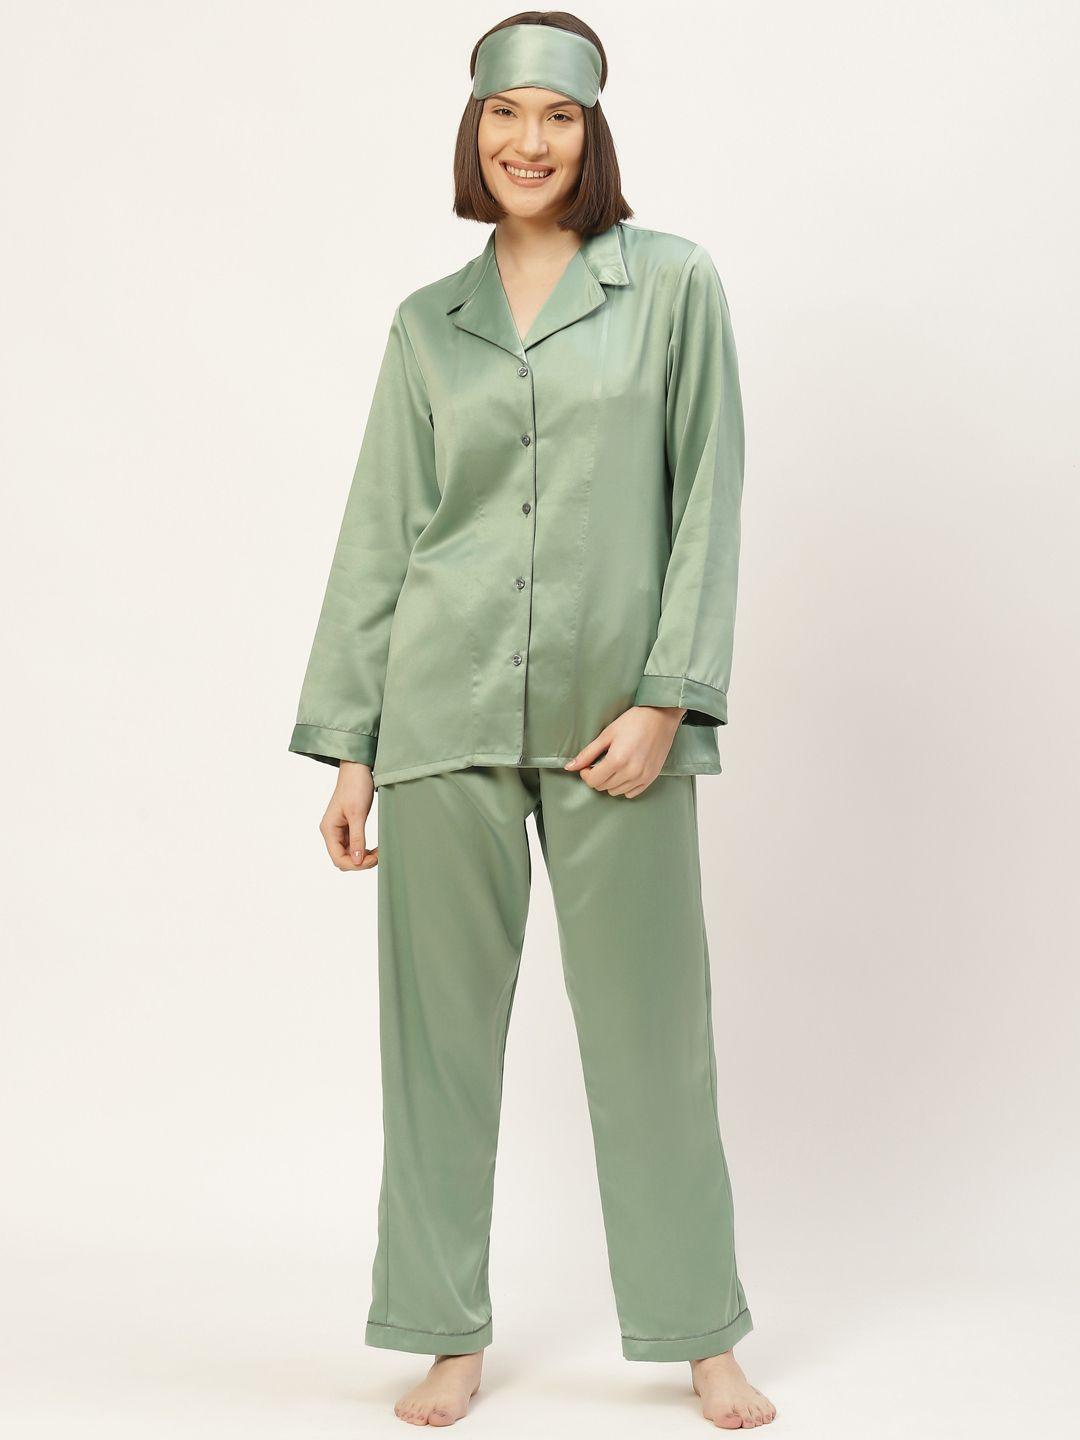 bedgasm-women-olive-green-satin-night-suit-with-eye-mask